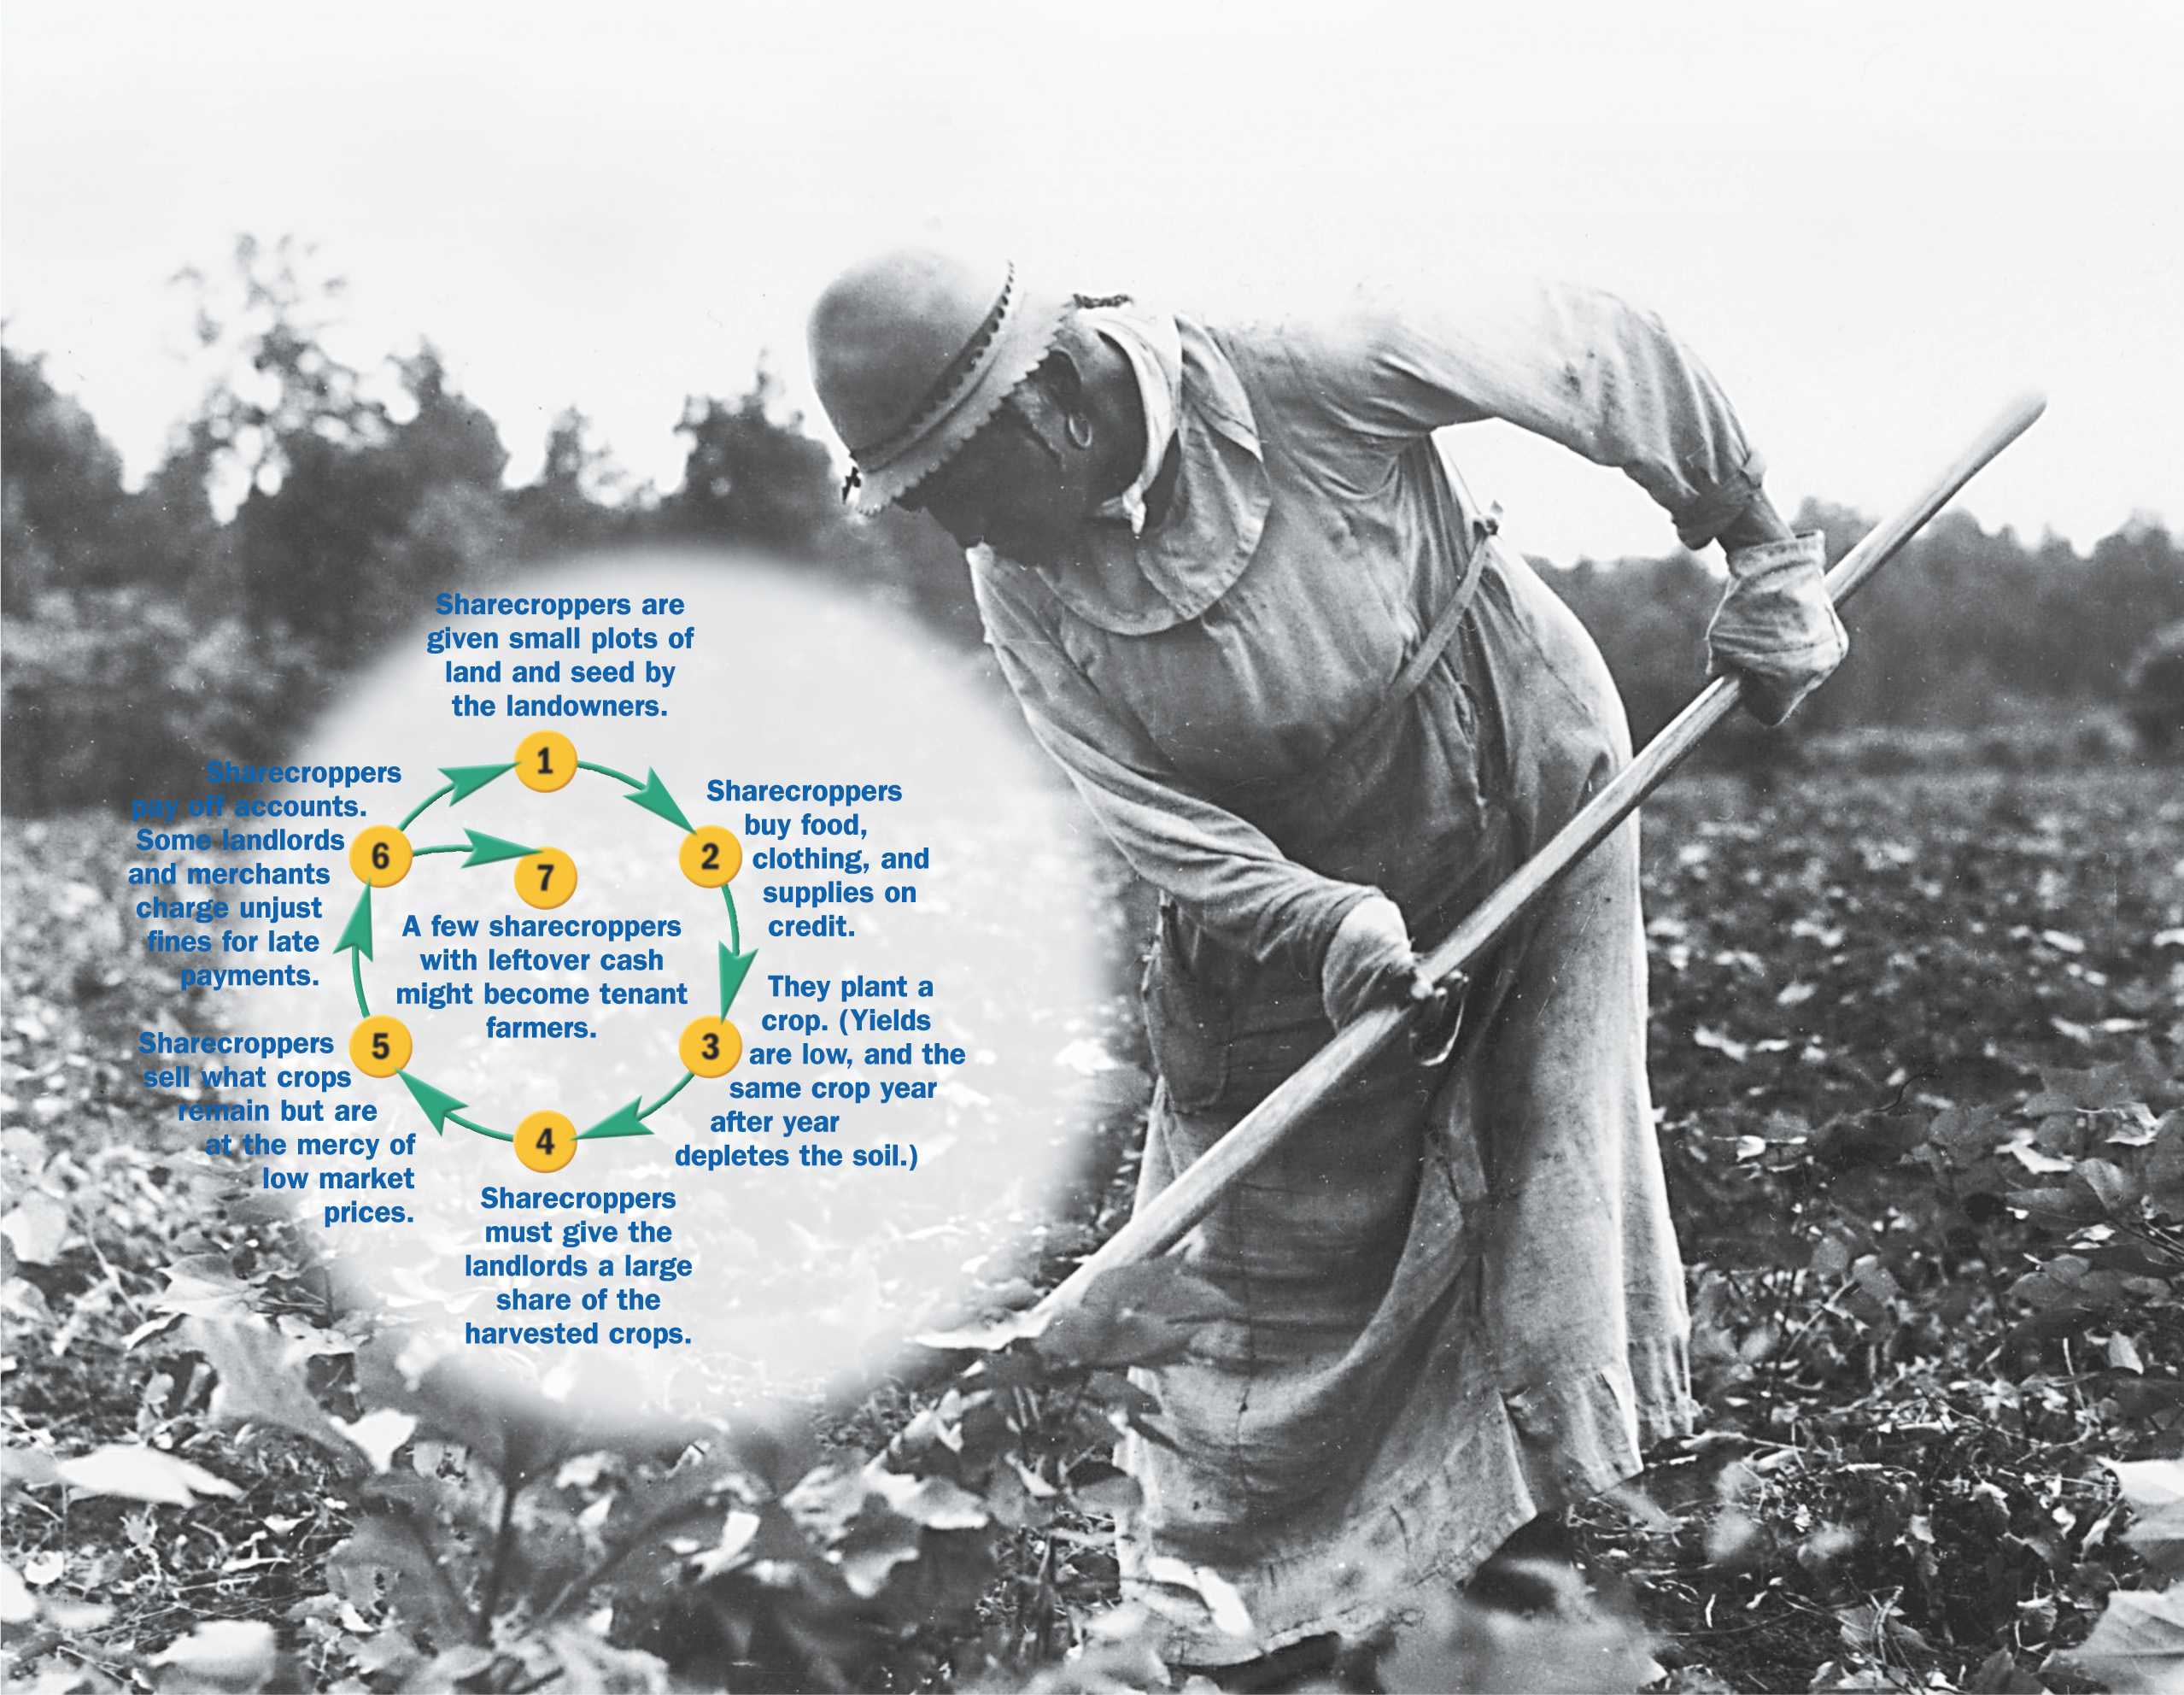 A circular chart showing how sharecropping works accompanies a photo of a woman working in a field.